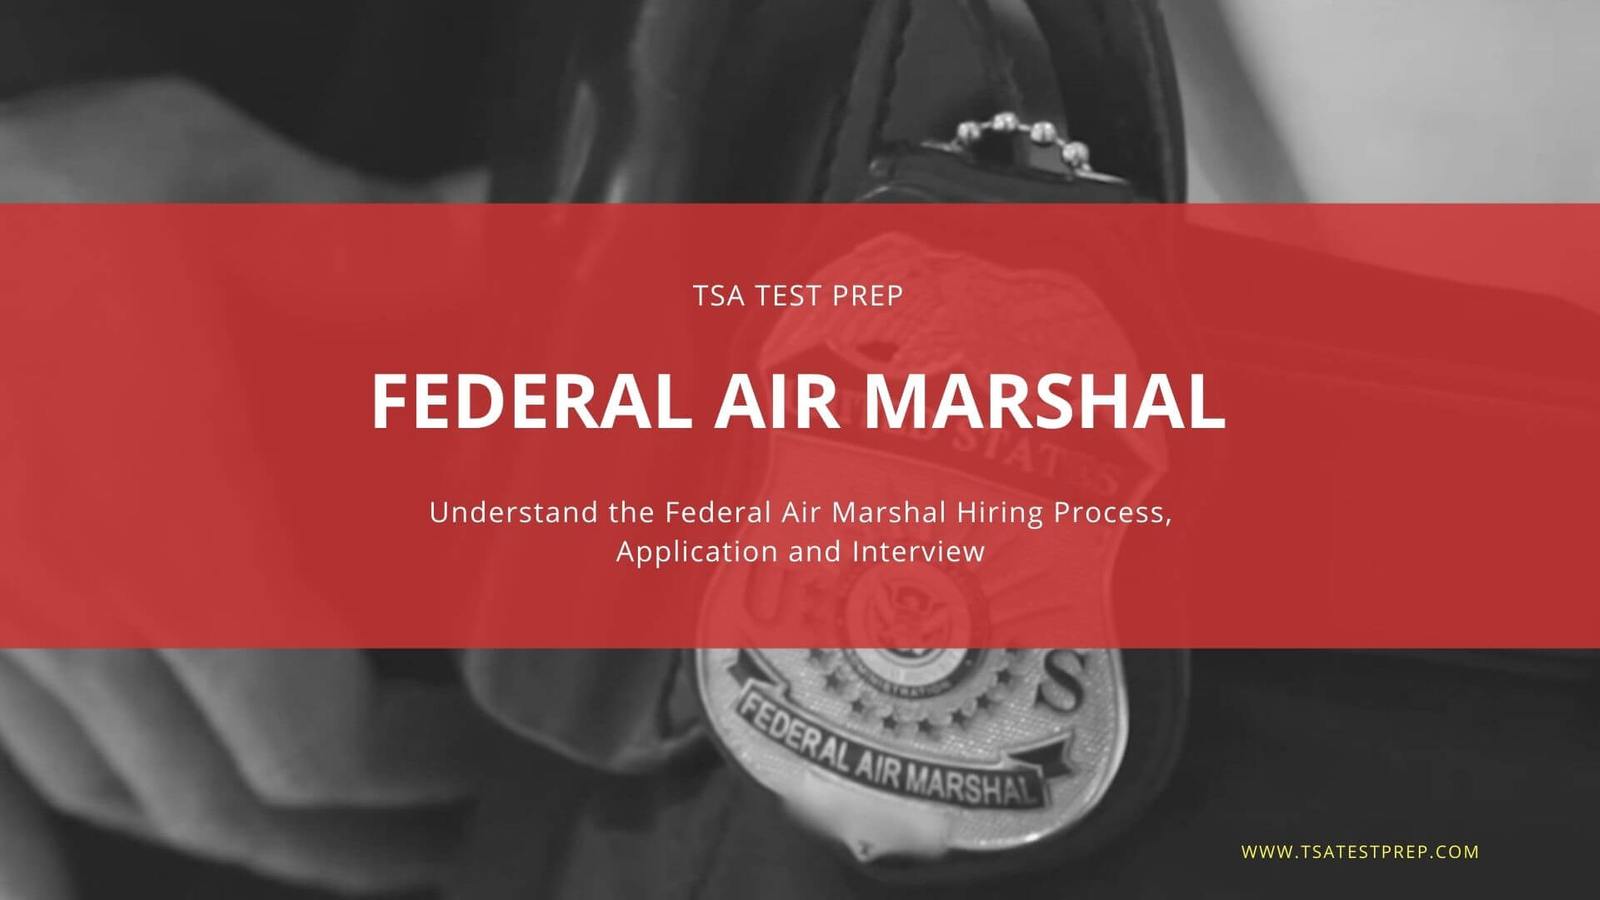 Understand the Federal Air Marshal Hiring Process